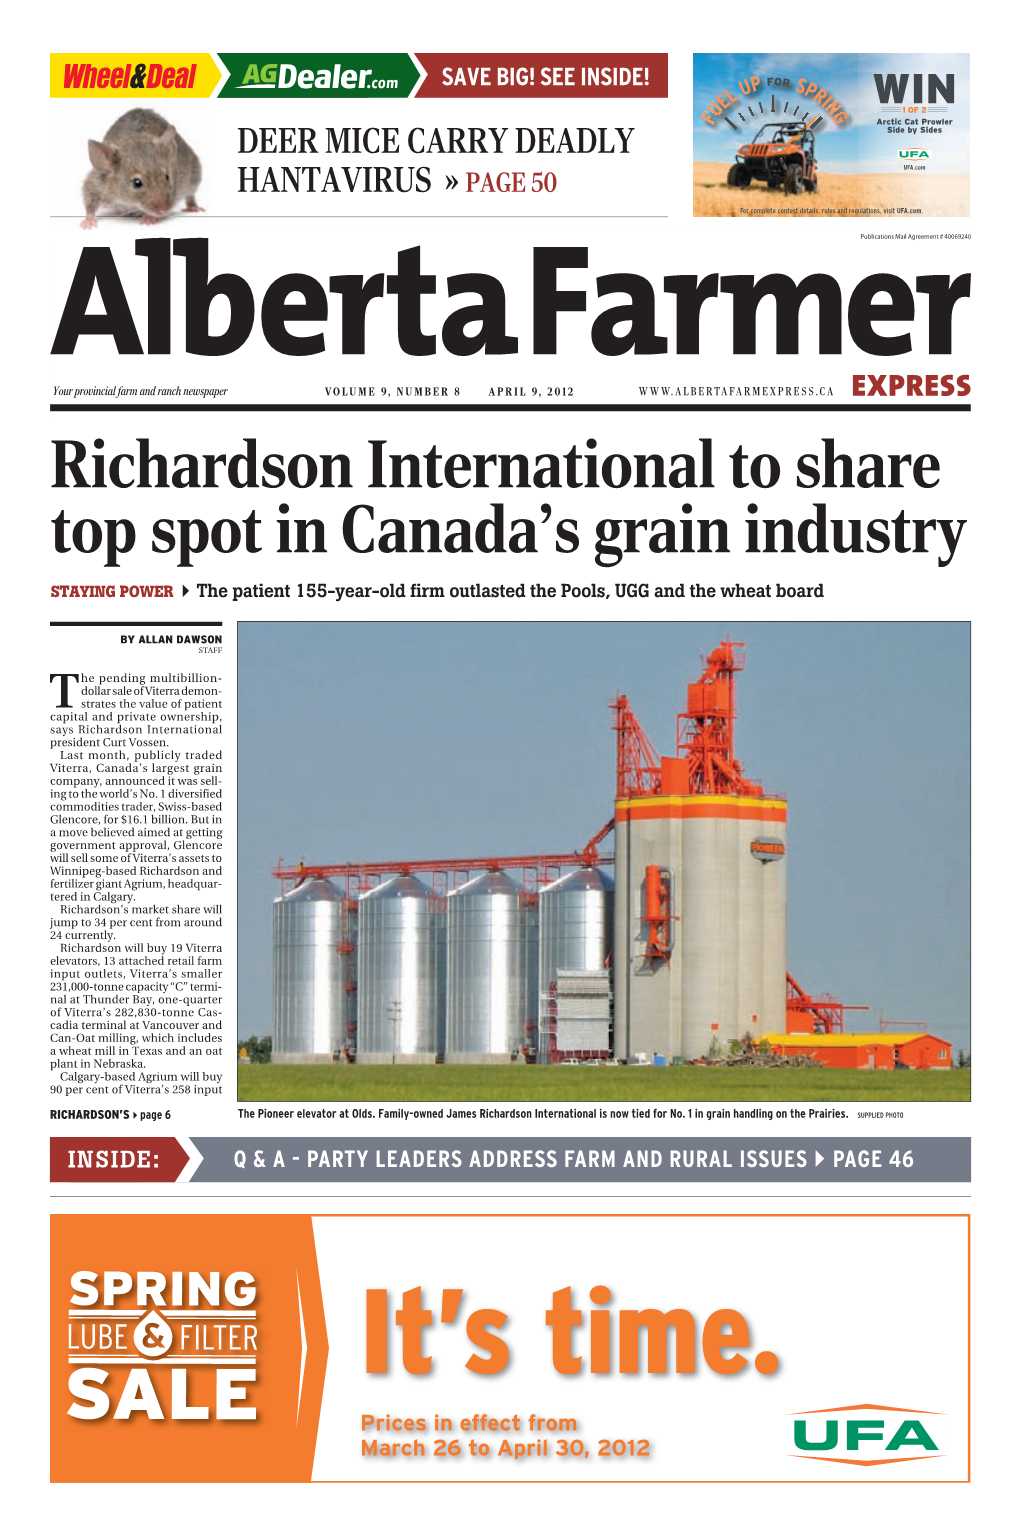 Richardson International to Share Top Spot in Canada's Grain Industry